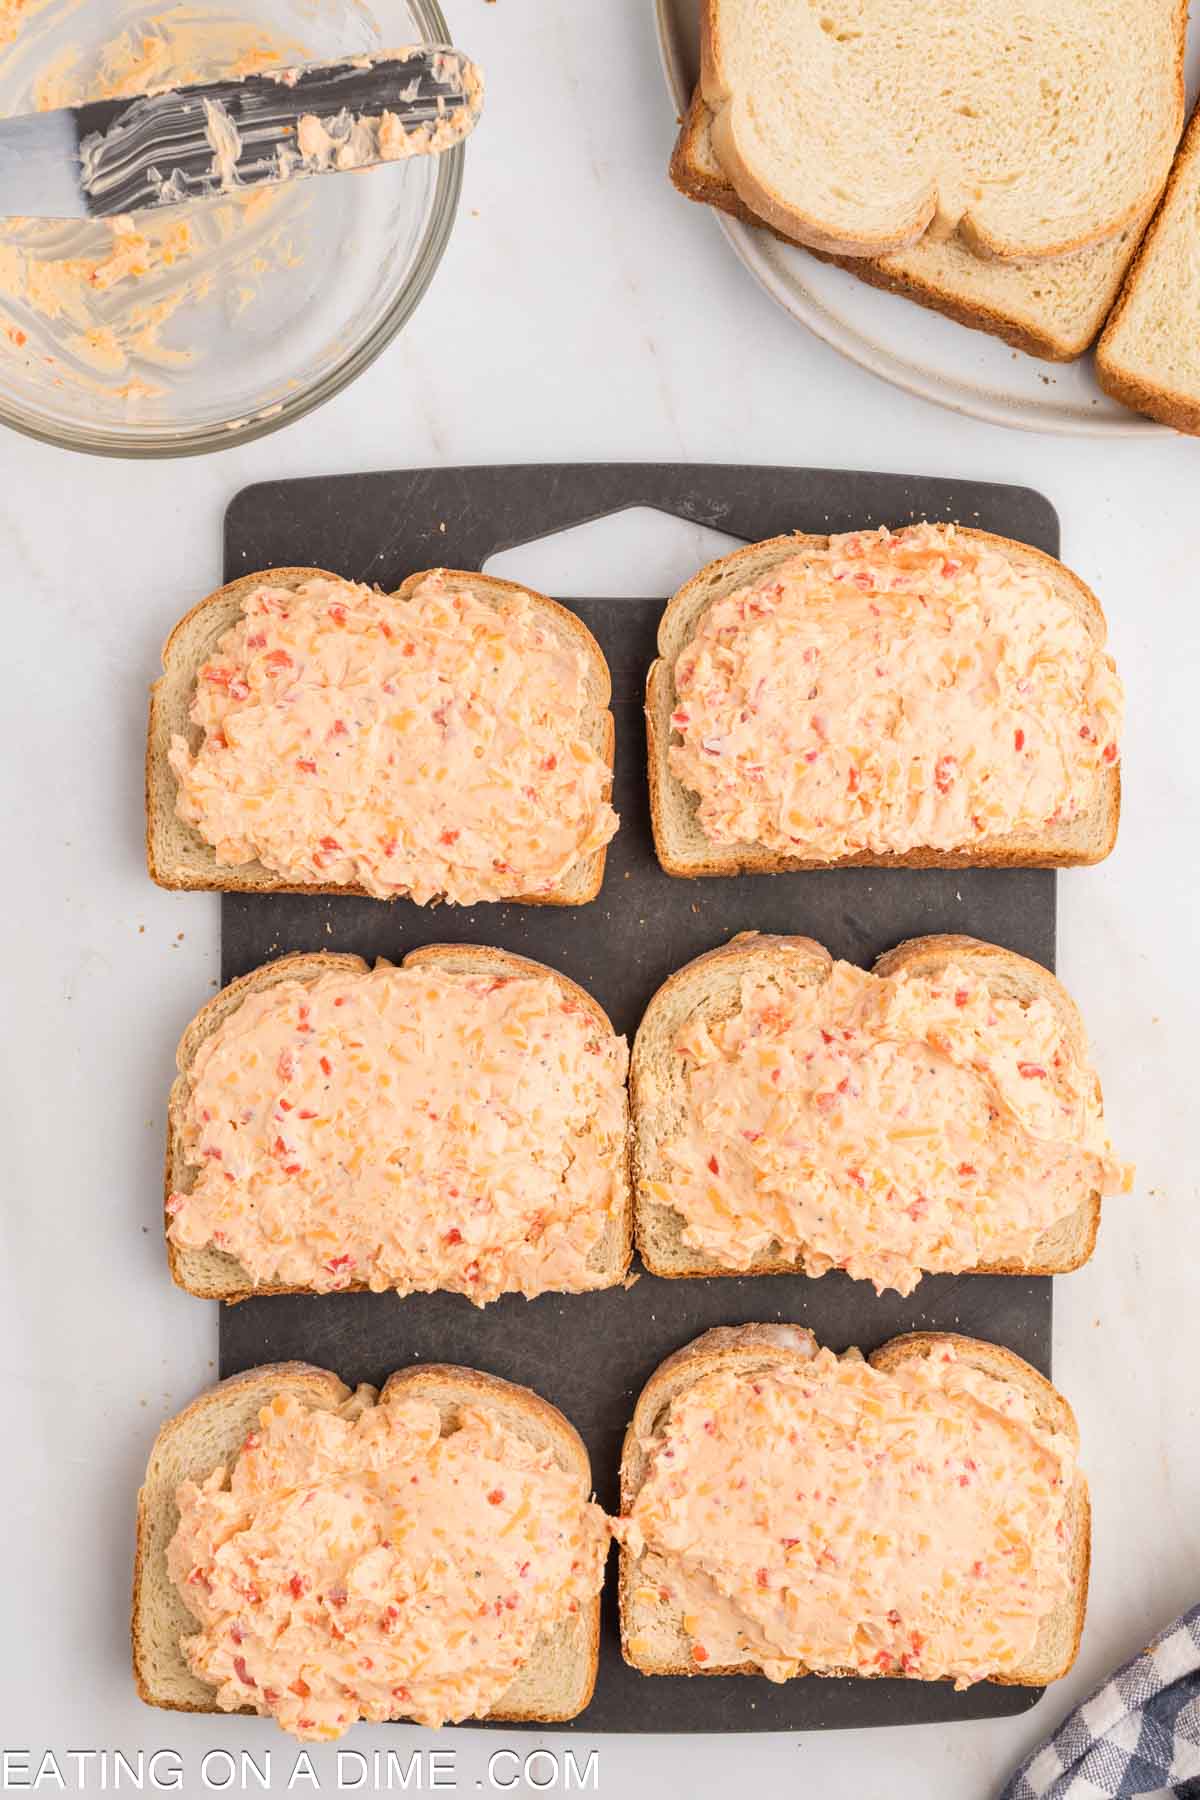 Slices of bread topped with pimento cheese spread